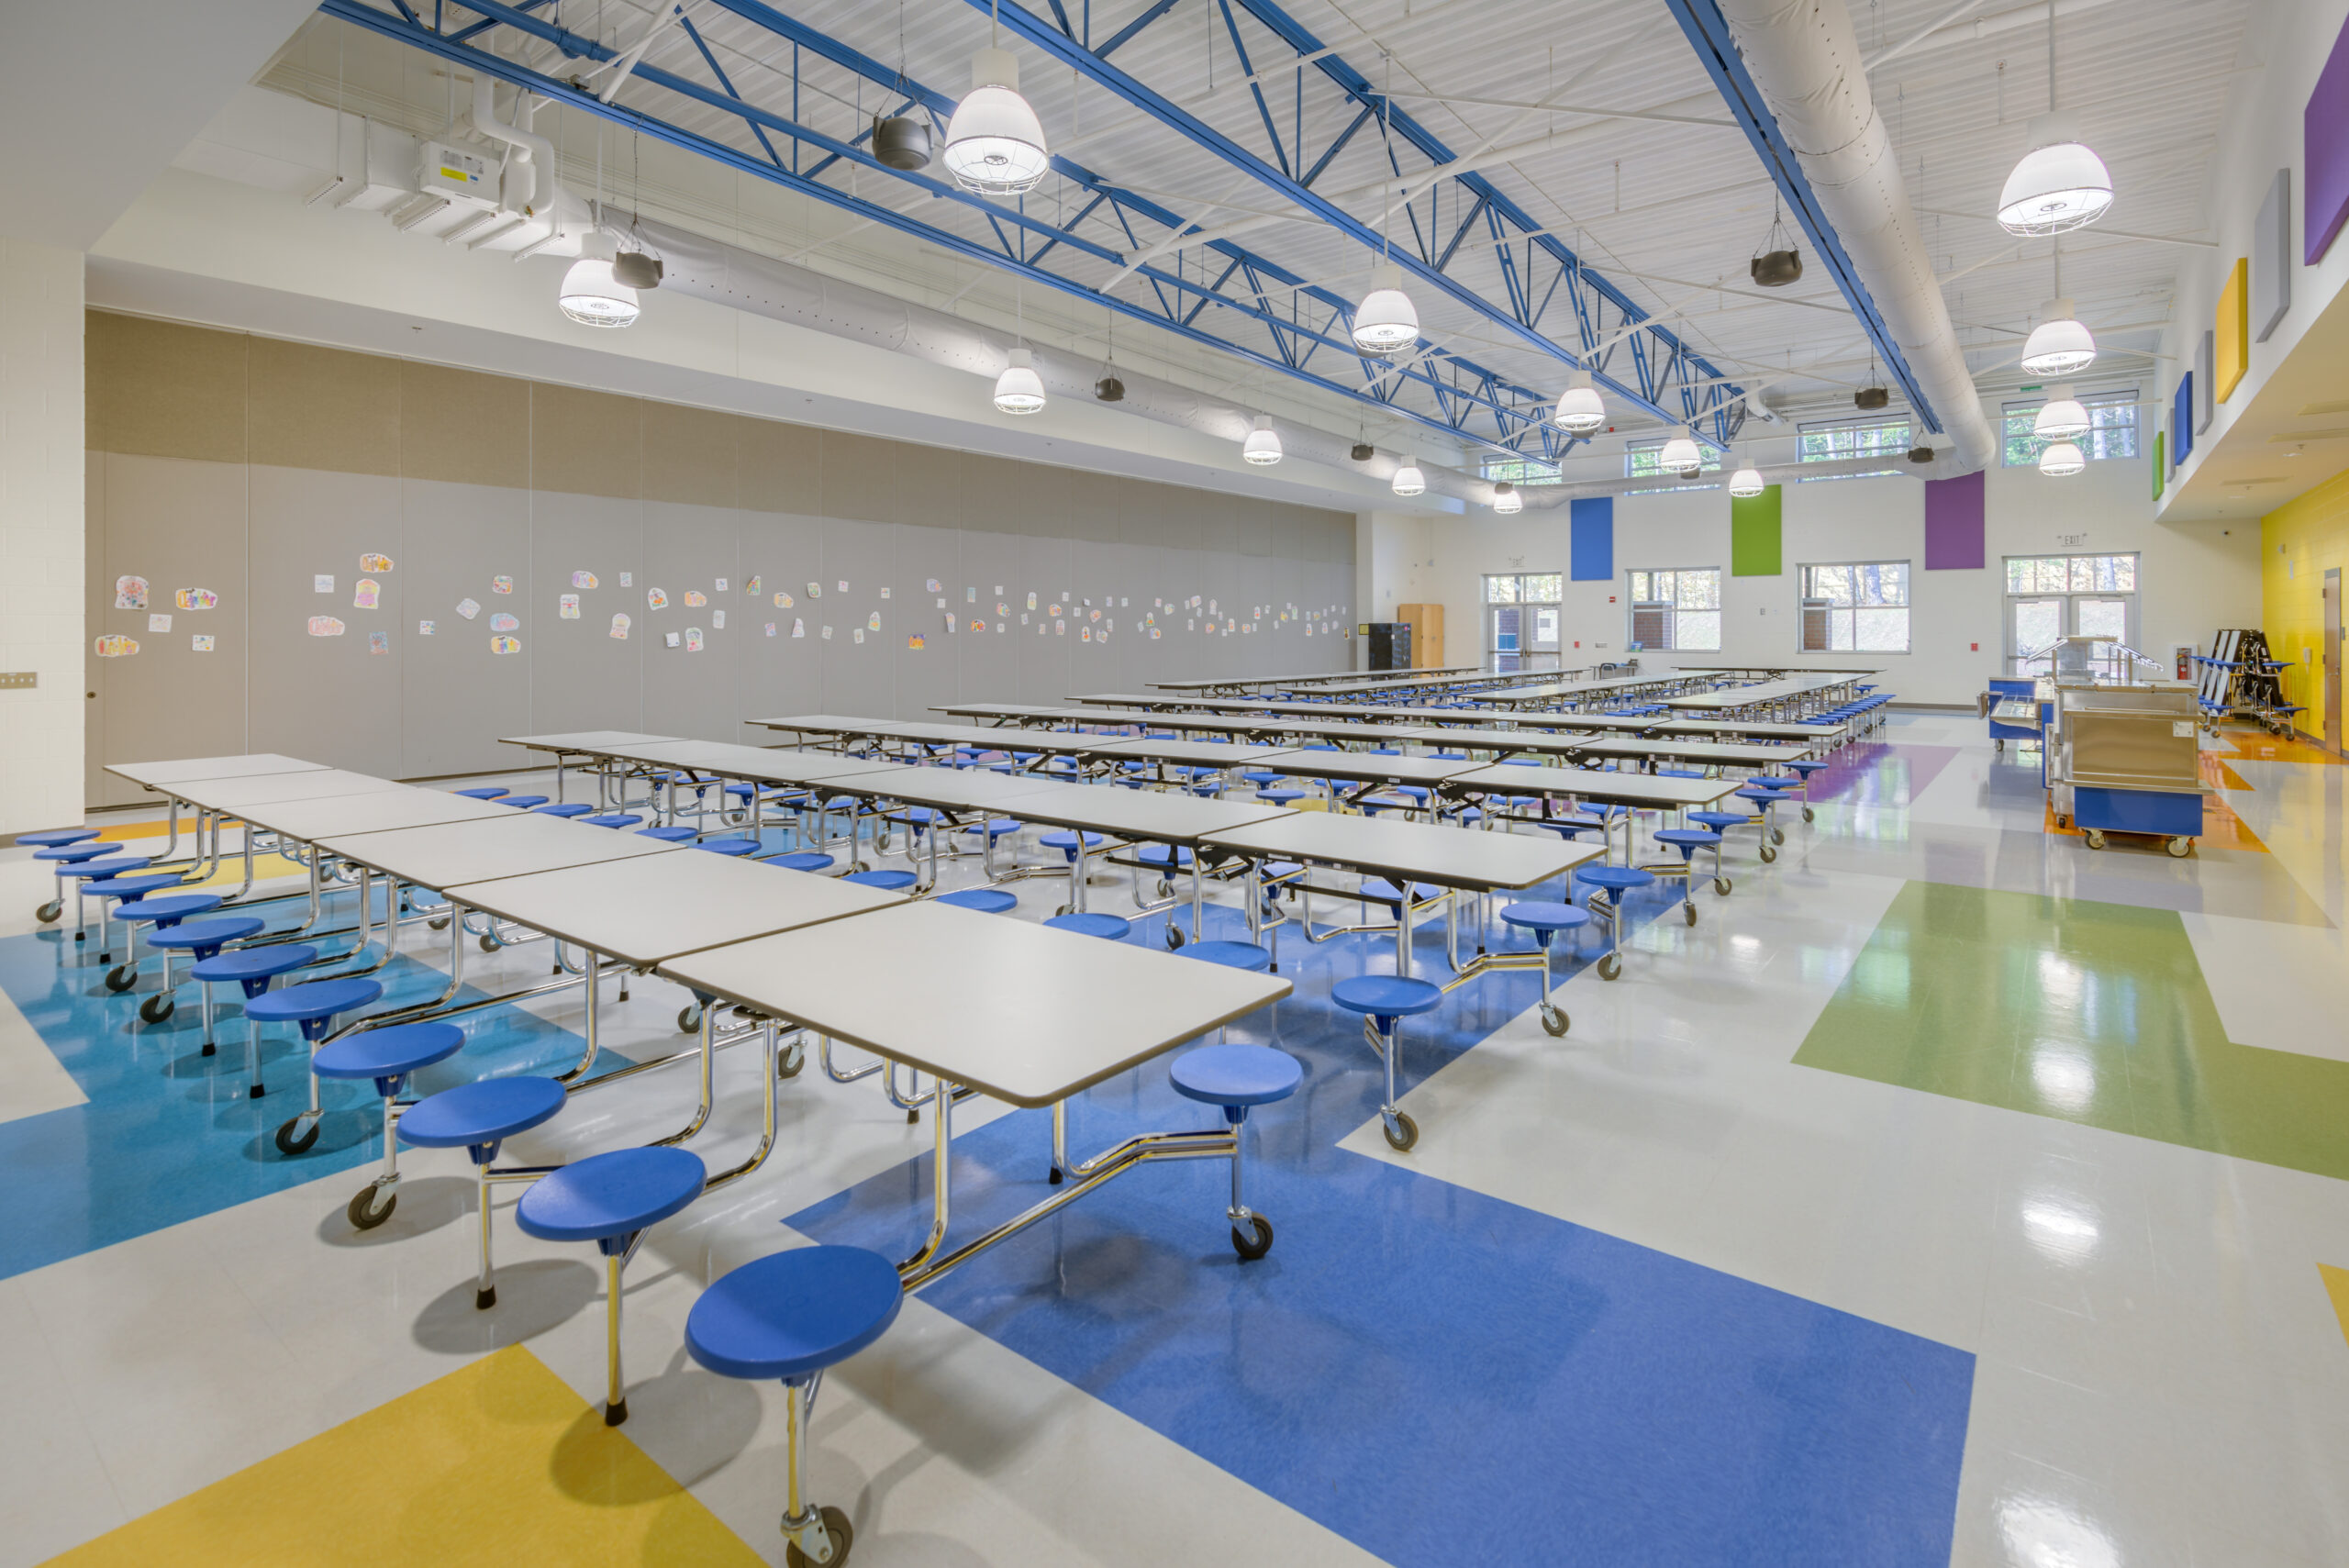 Barton Pond Elementary School Cafeteria with Foldable Lunch Tables with Attached Blue Stools for Students